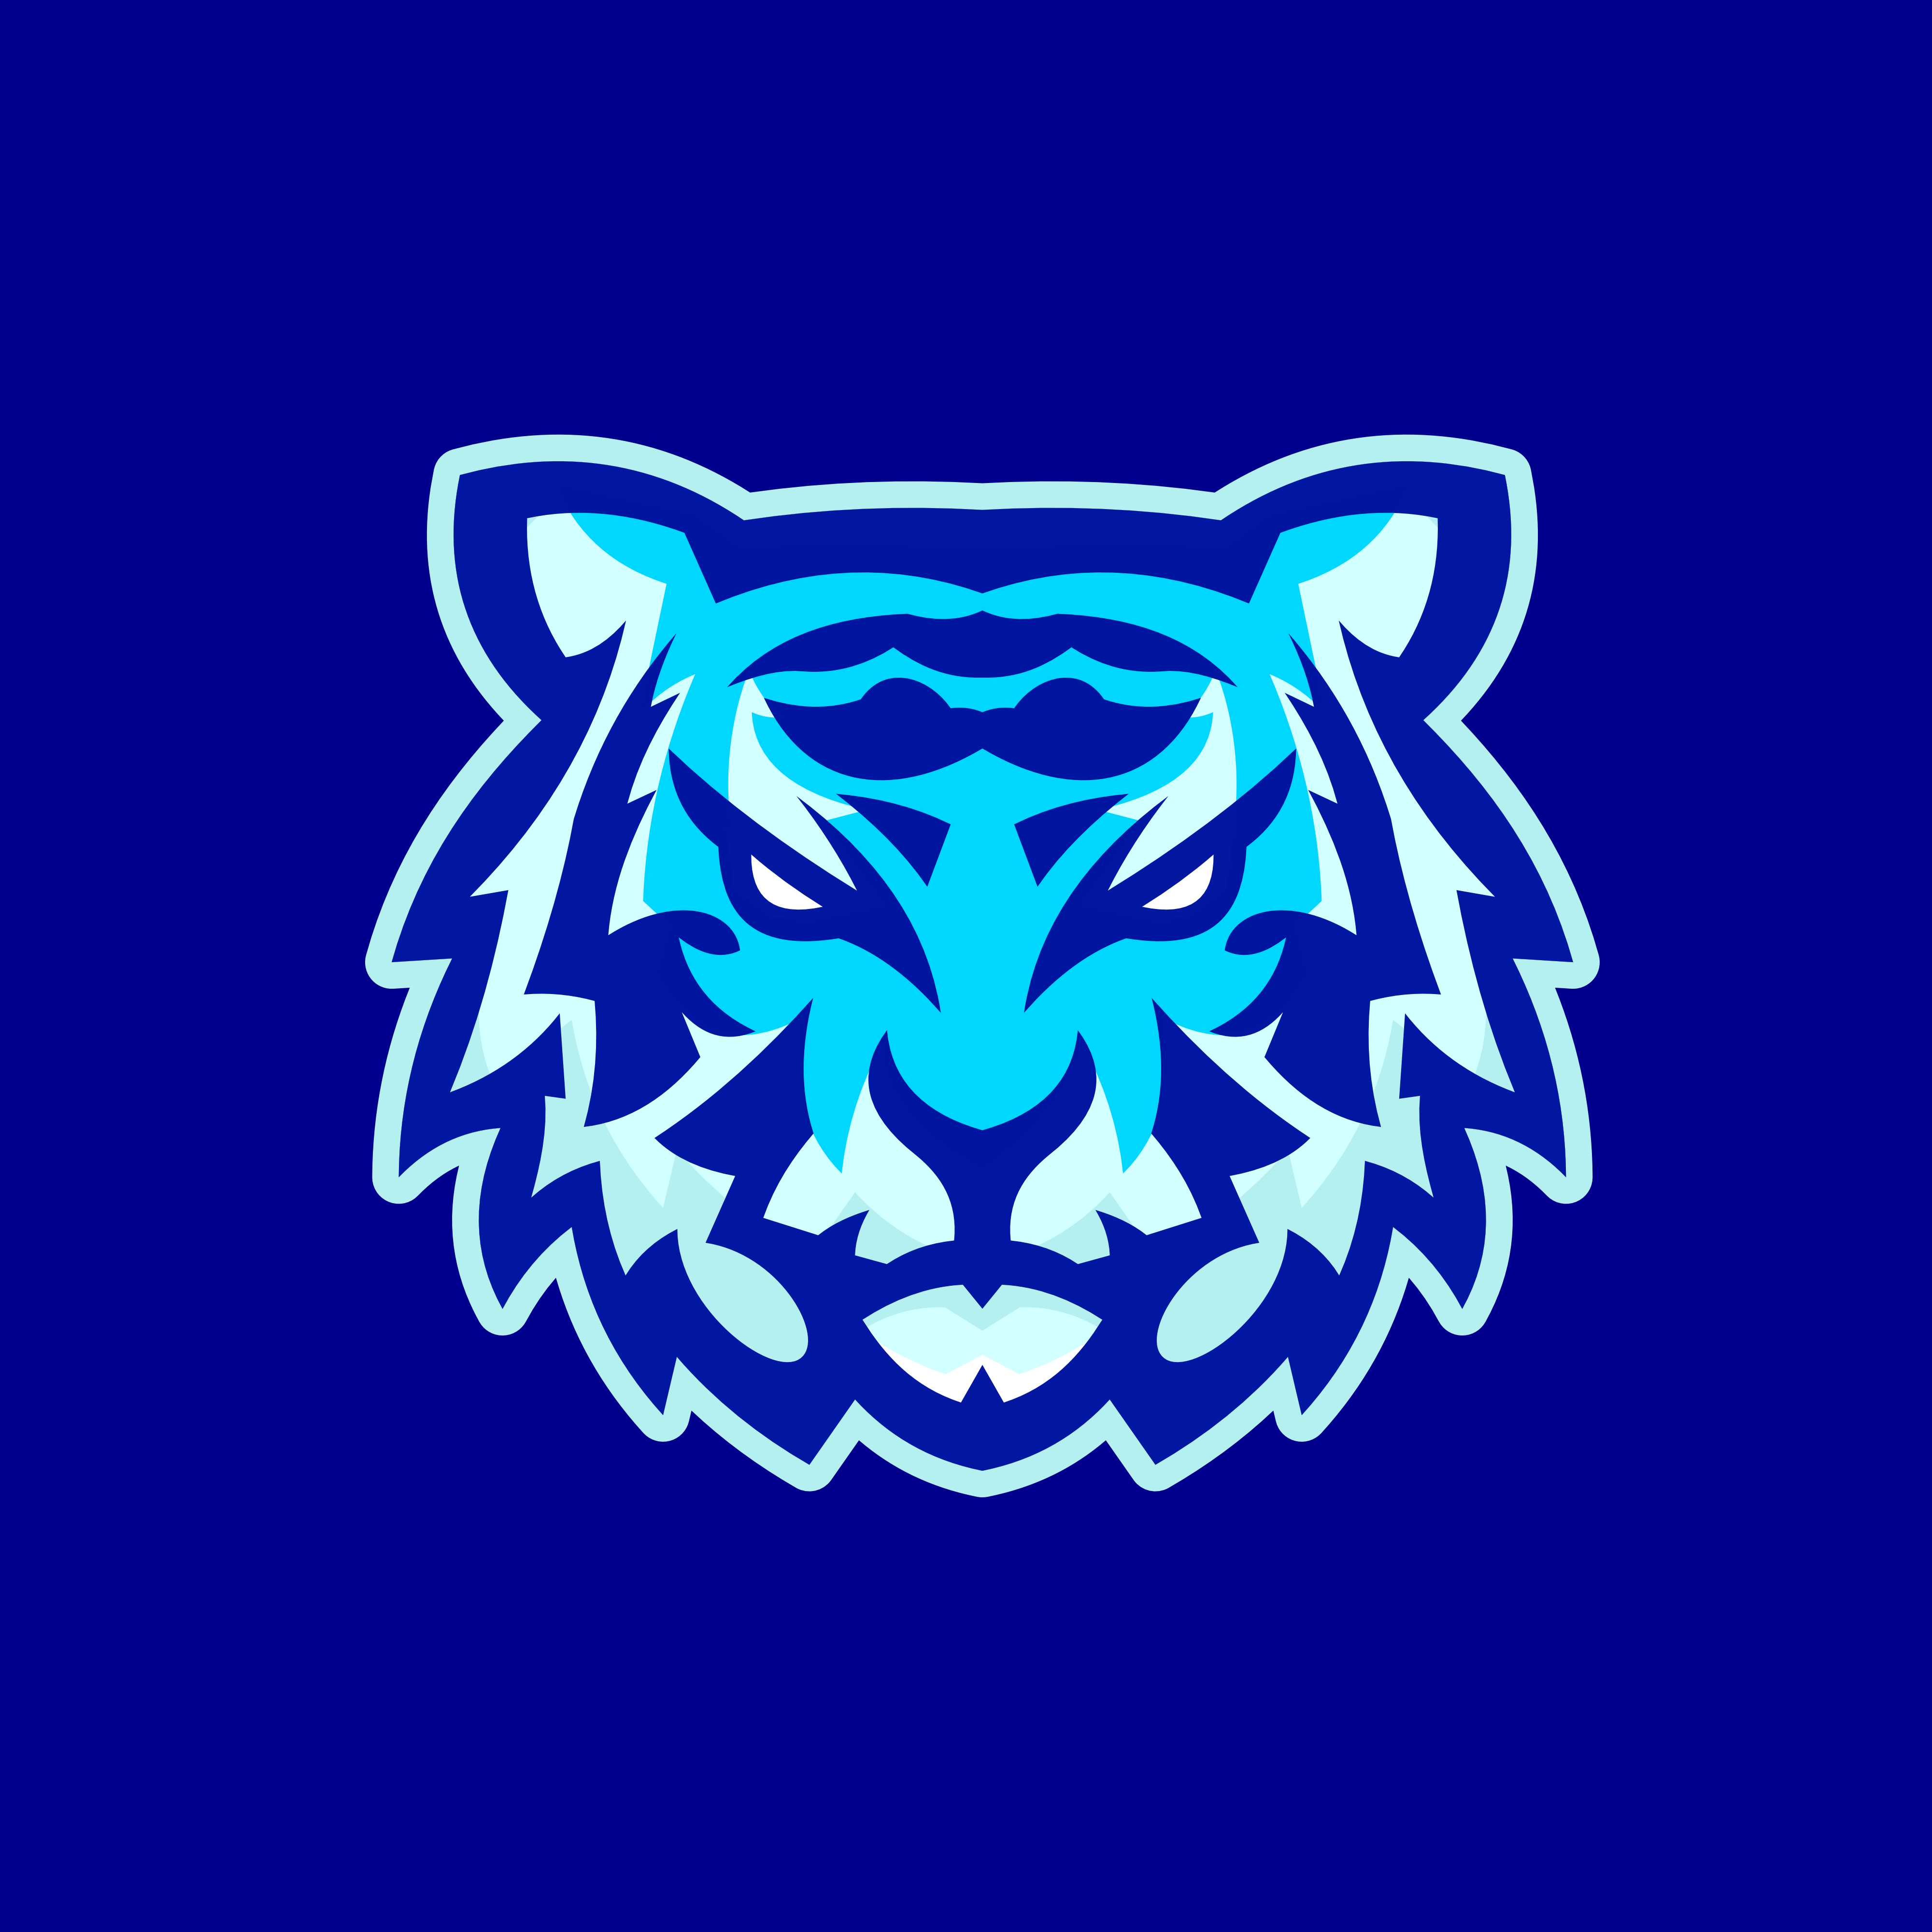 Download Kenzo Tiger In Electric Blue Wallpaper | Wallpapers.com